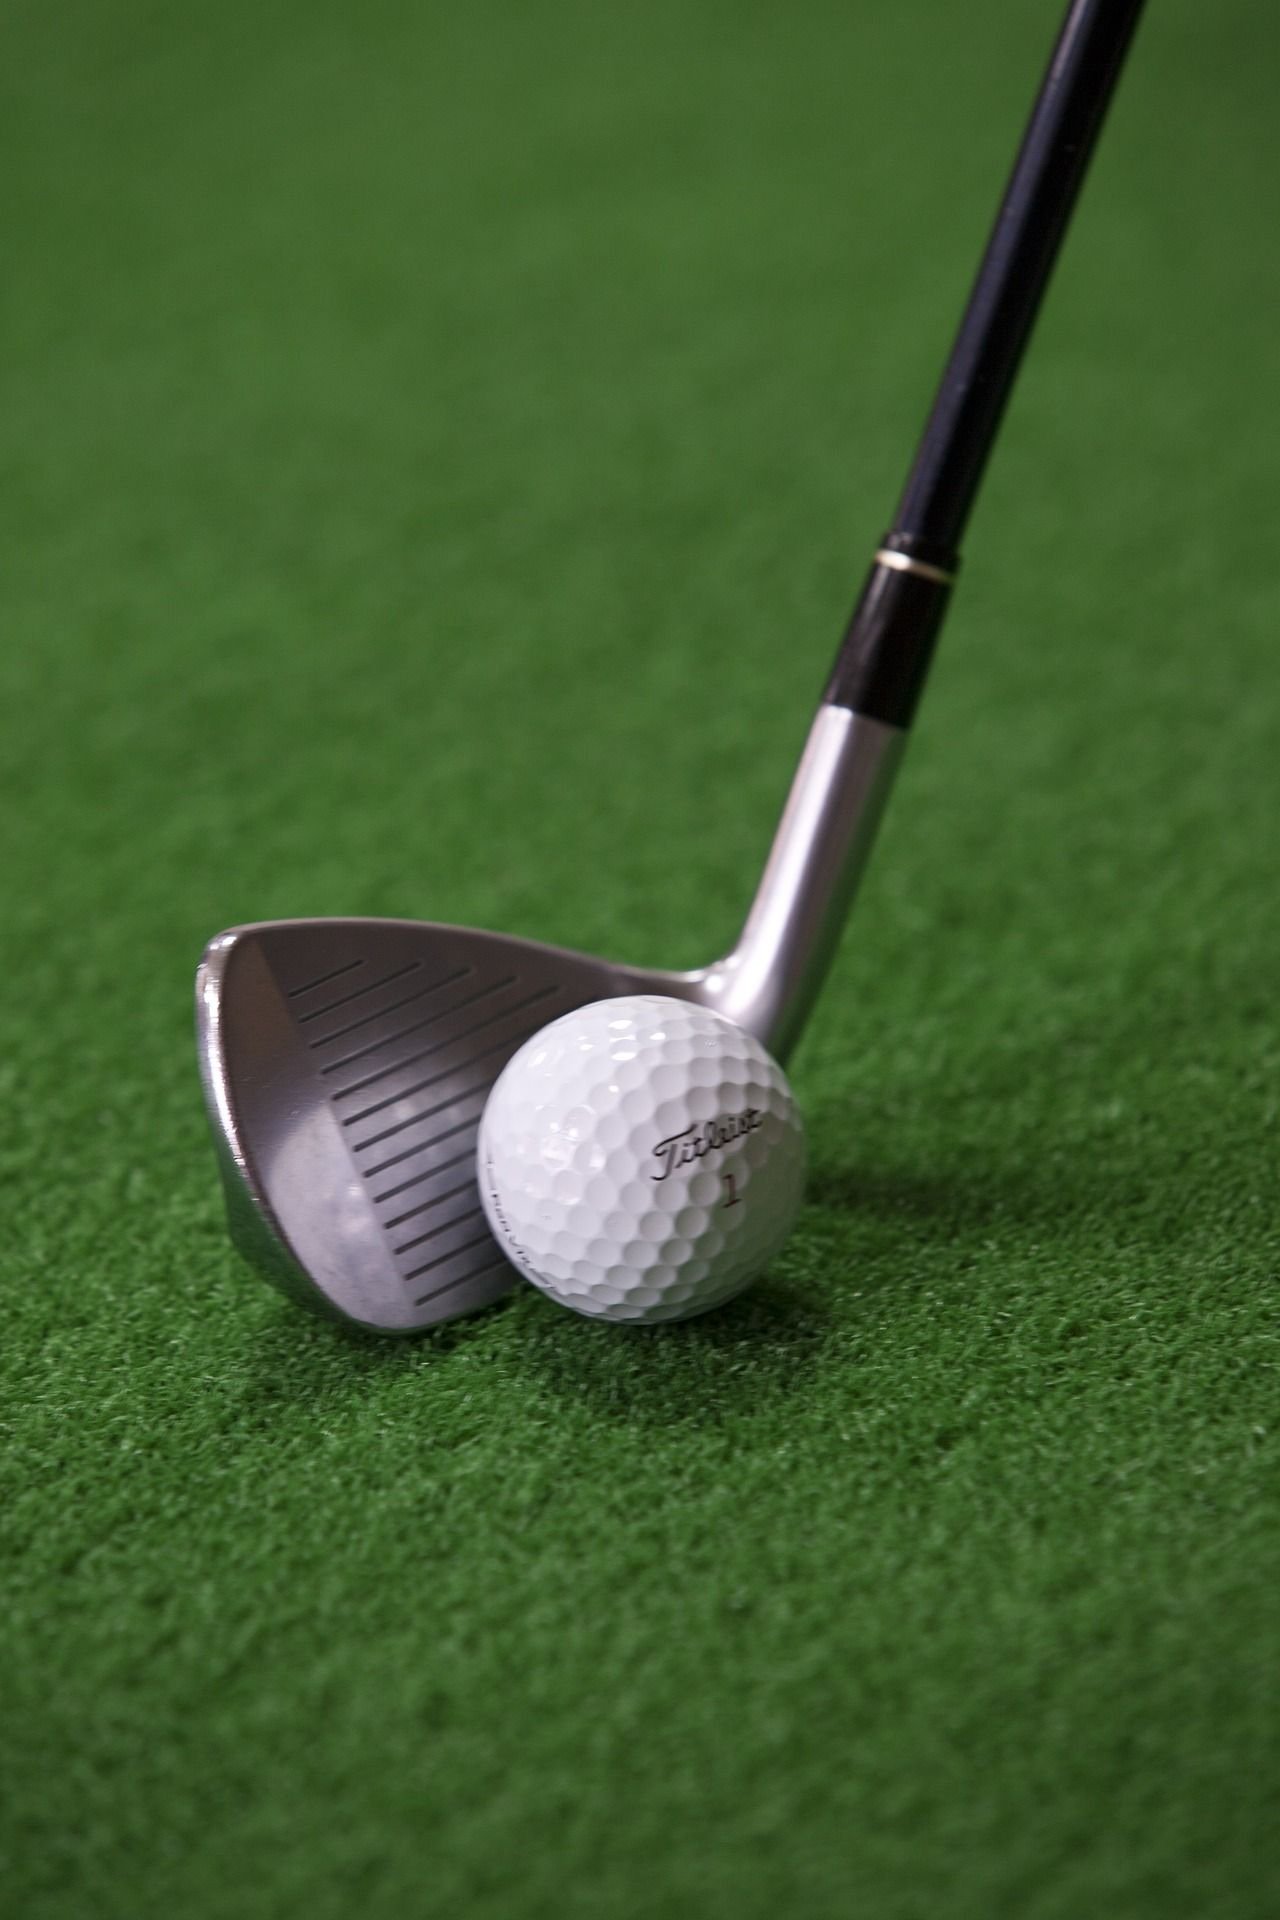 Close-up of a golf club next to a white golf ball on a green turf, resembling the pristine putting greens often seen in Tampa, FL. The club is positioned as if about to strike the ball. The textured surface of the golf ball and the metallic finish of the club are clearly visible.